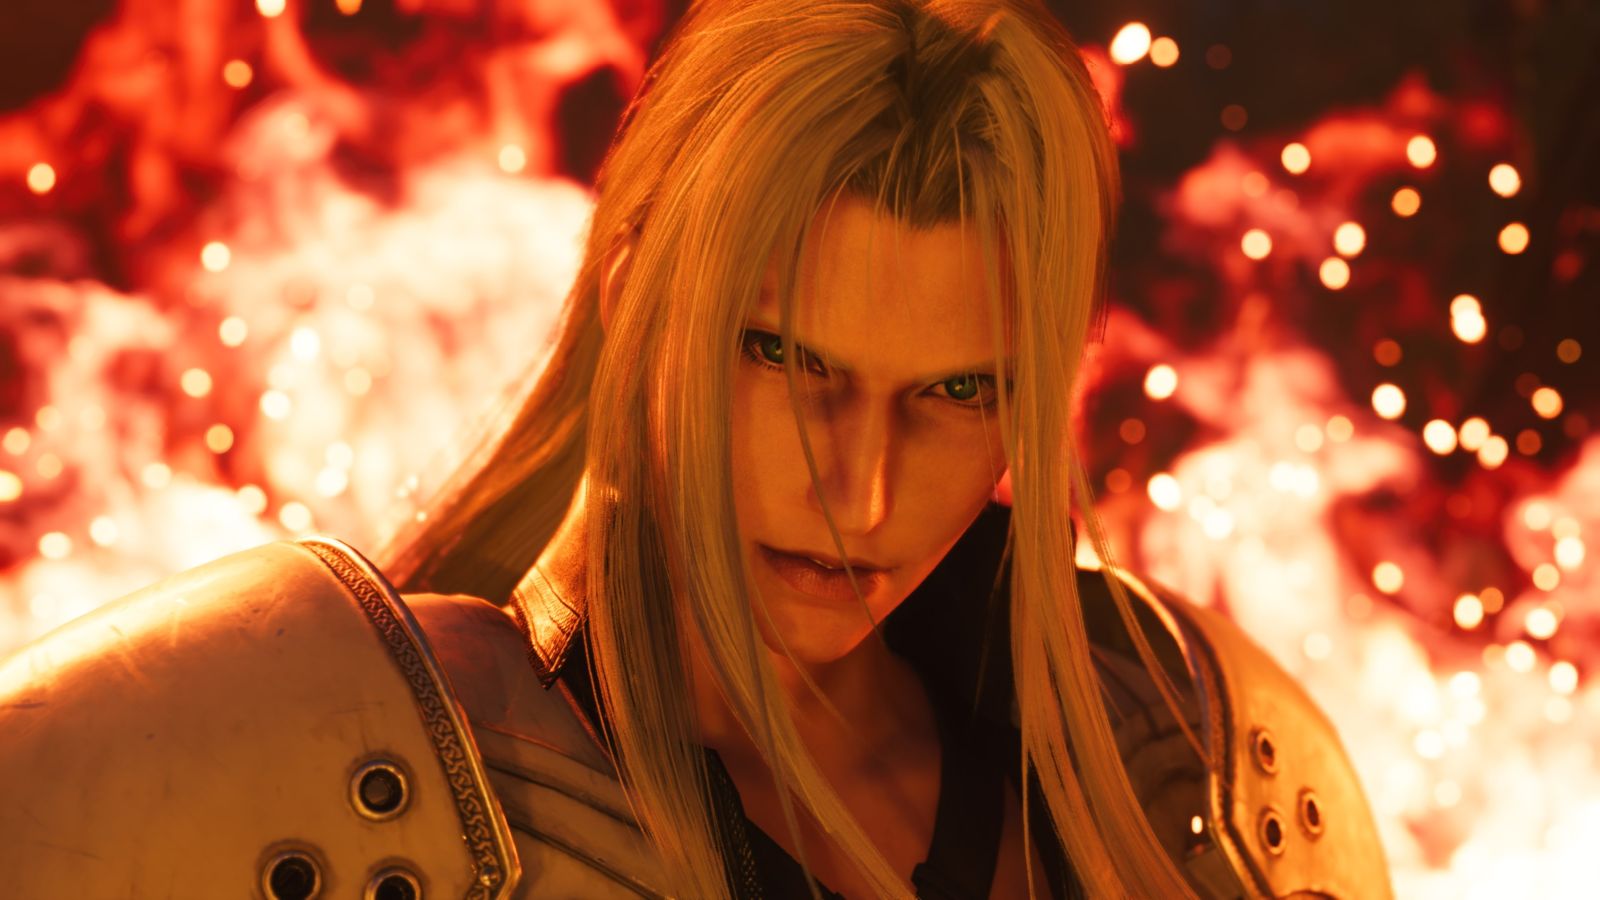 Final Fantasy VII Rebirth' Is a Beautiful Idea at War With Itself